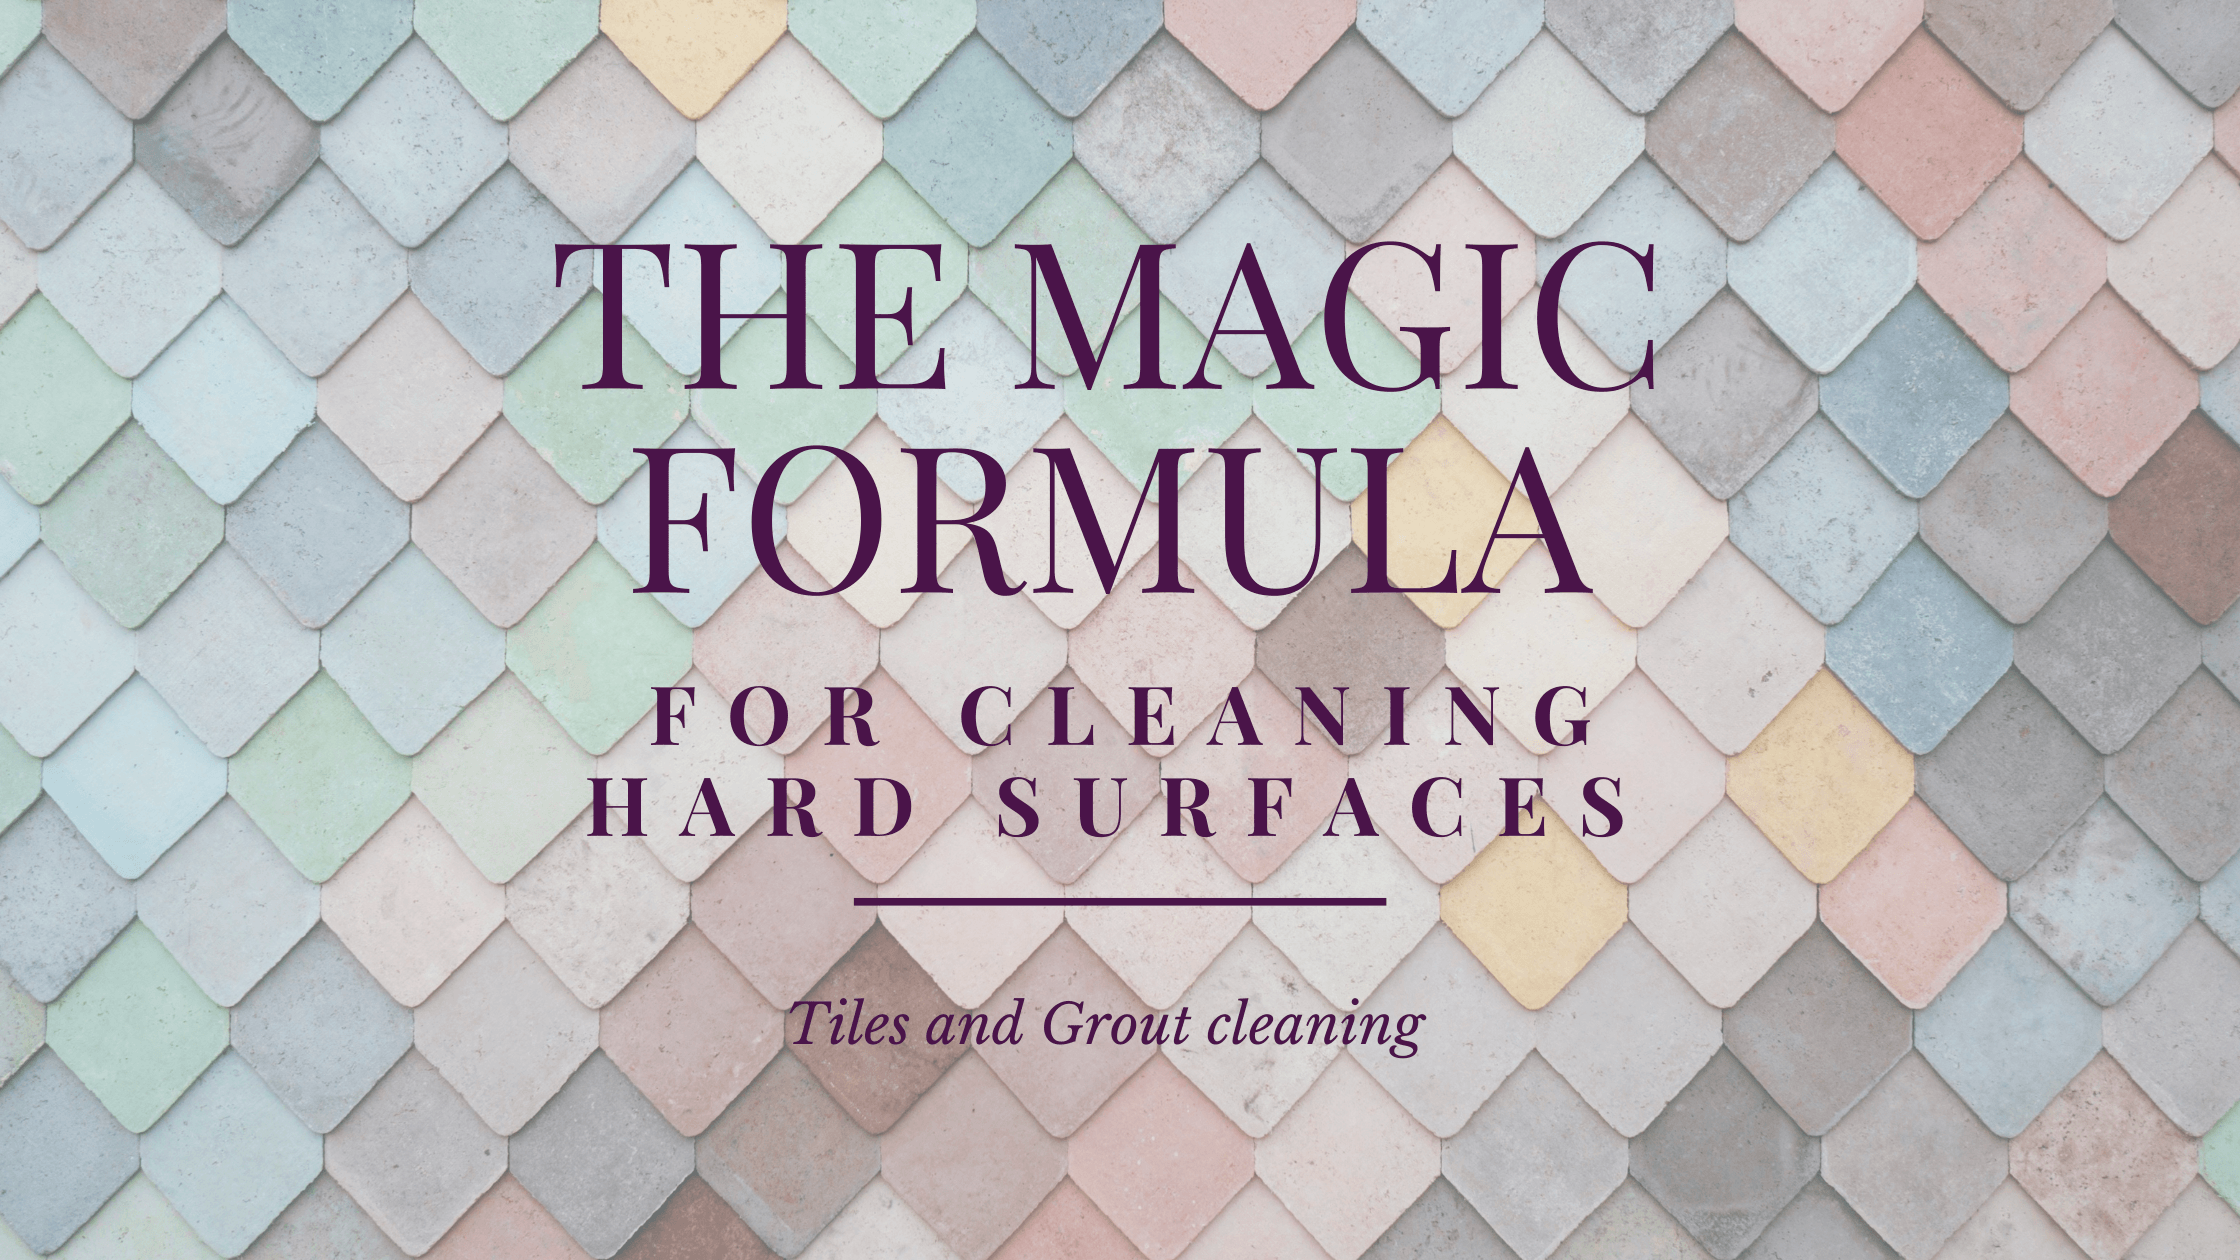 The Magic Formula for Cleaning Hard Surfaces - Tile and Grout Cleaning 1